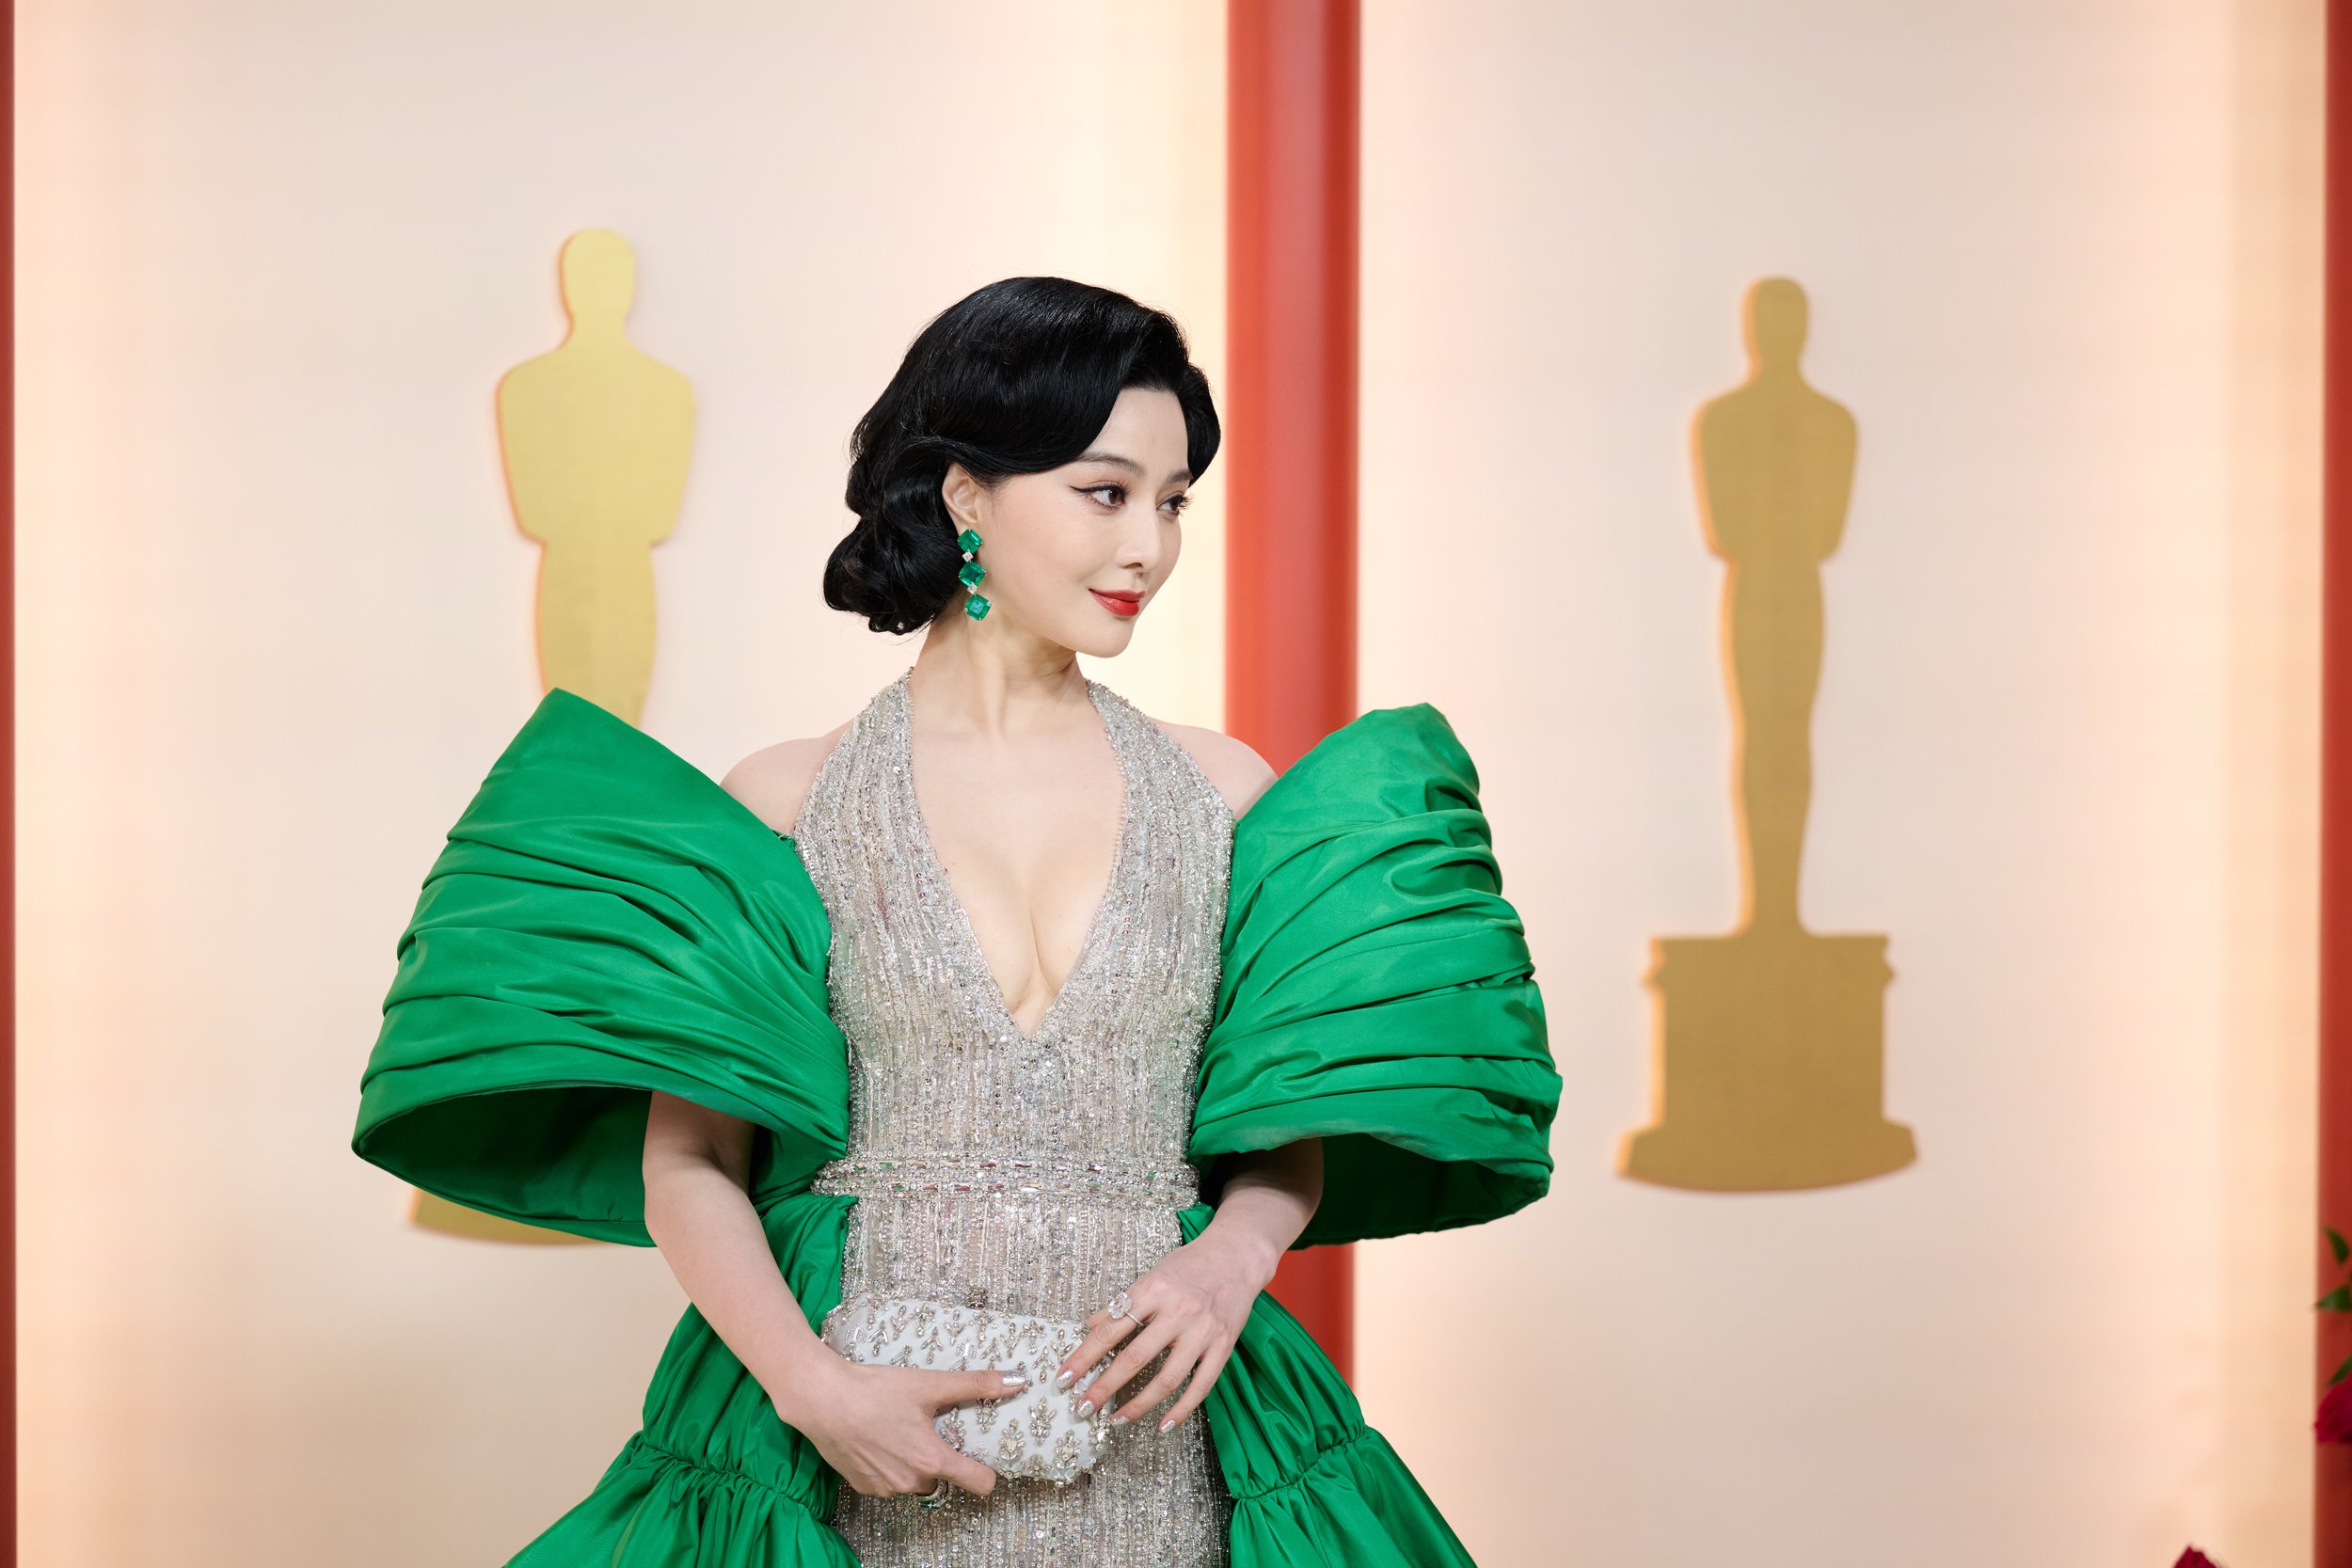 Fan Binbging arrives on the red carpet of The 95th Oscars